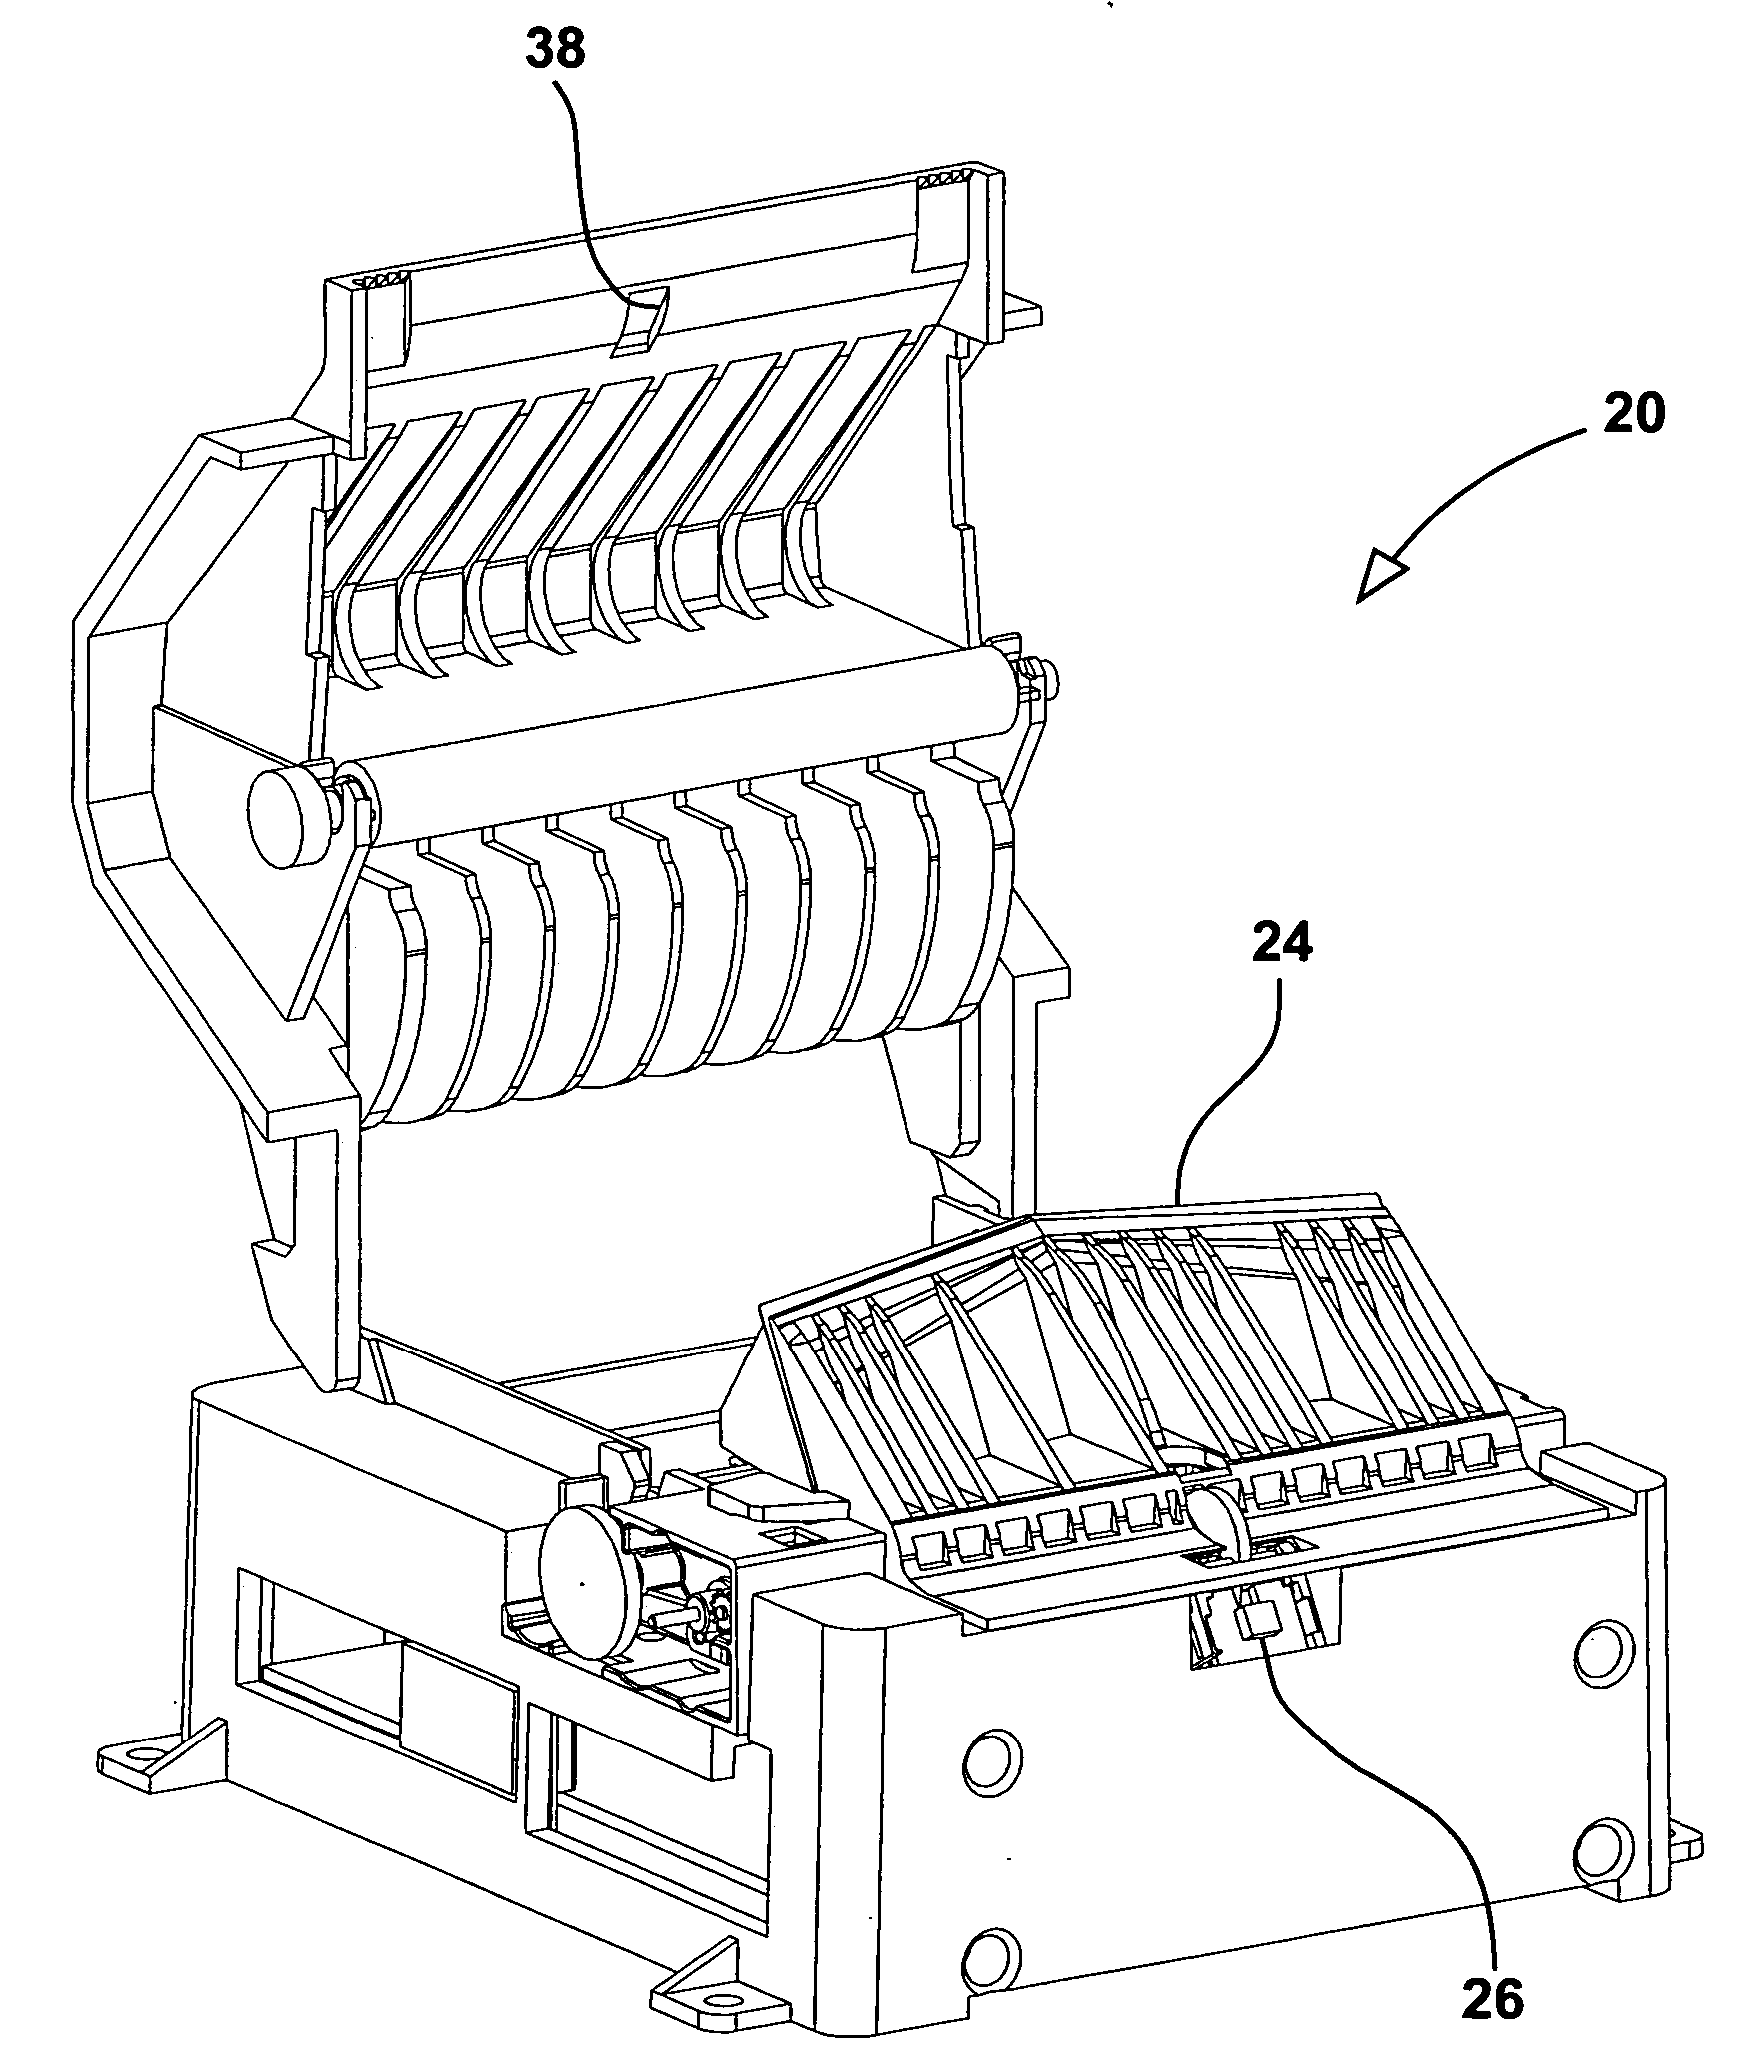 Ticket presenter for use with a ticket printer having a tear bar therein